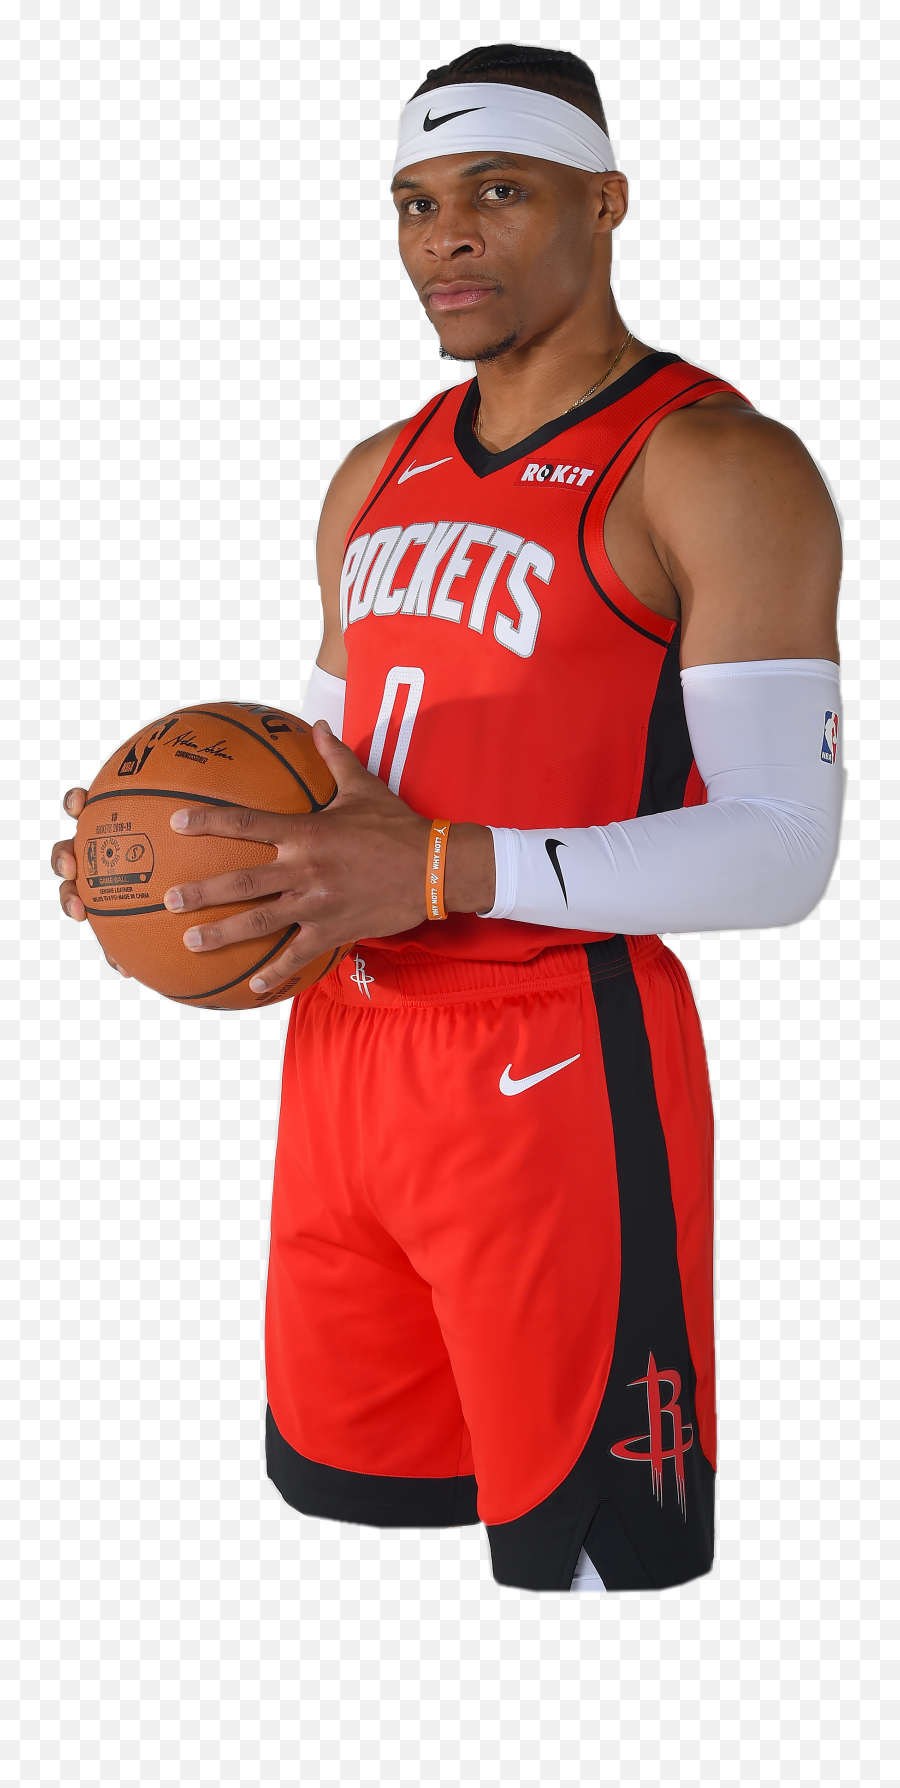 The Most Edited - Russell Westbrook Png Rockets Emoji,Russell Westbrook Emoji Shirt